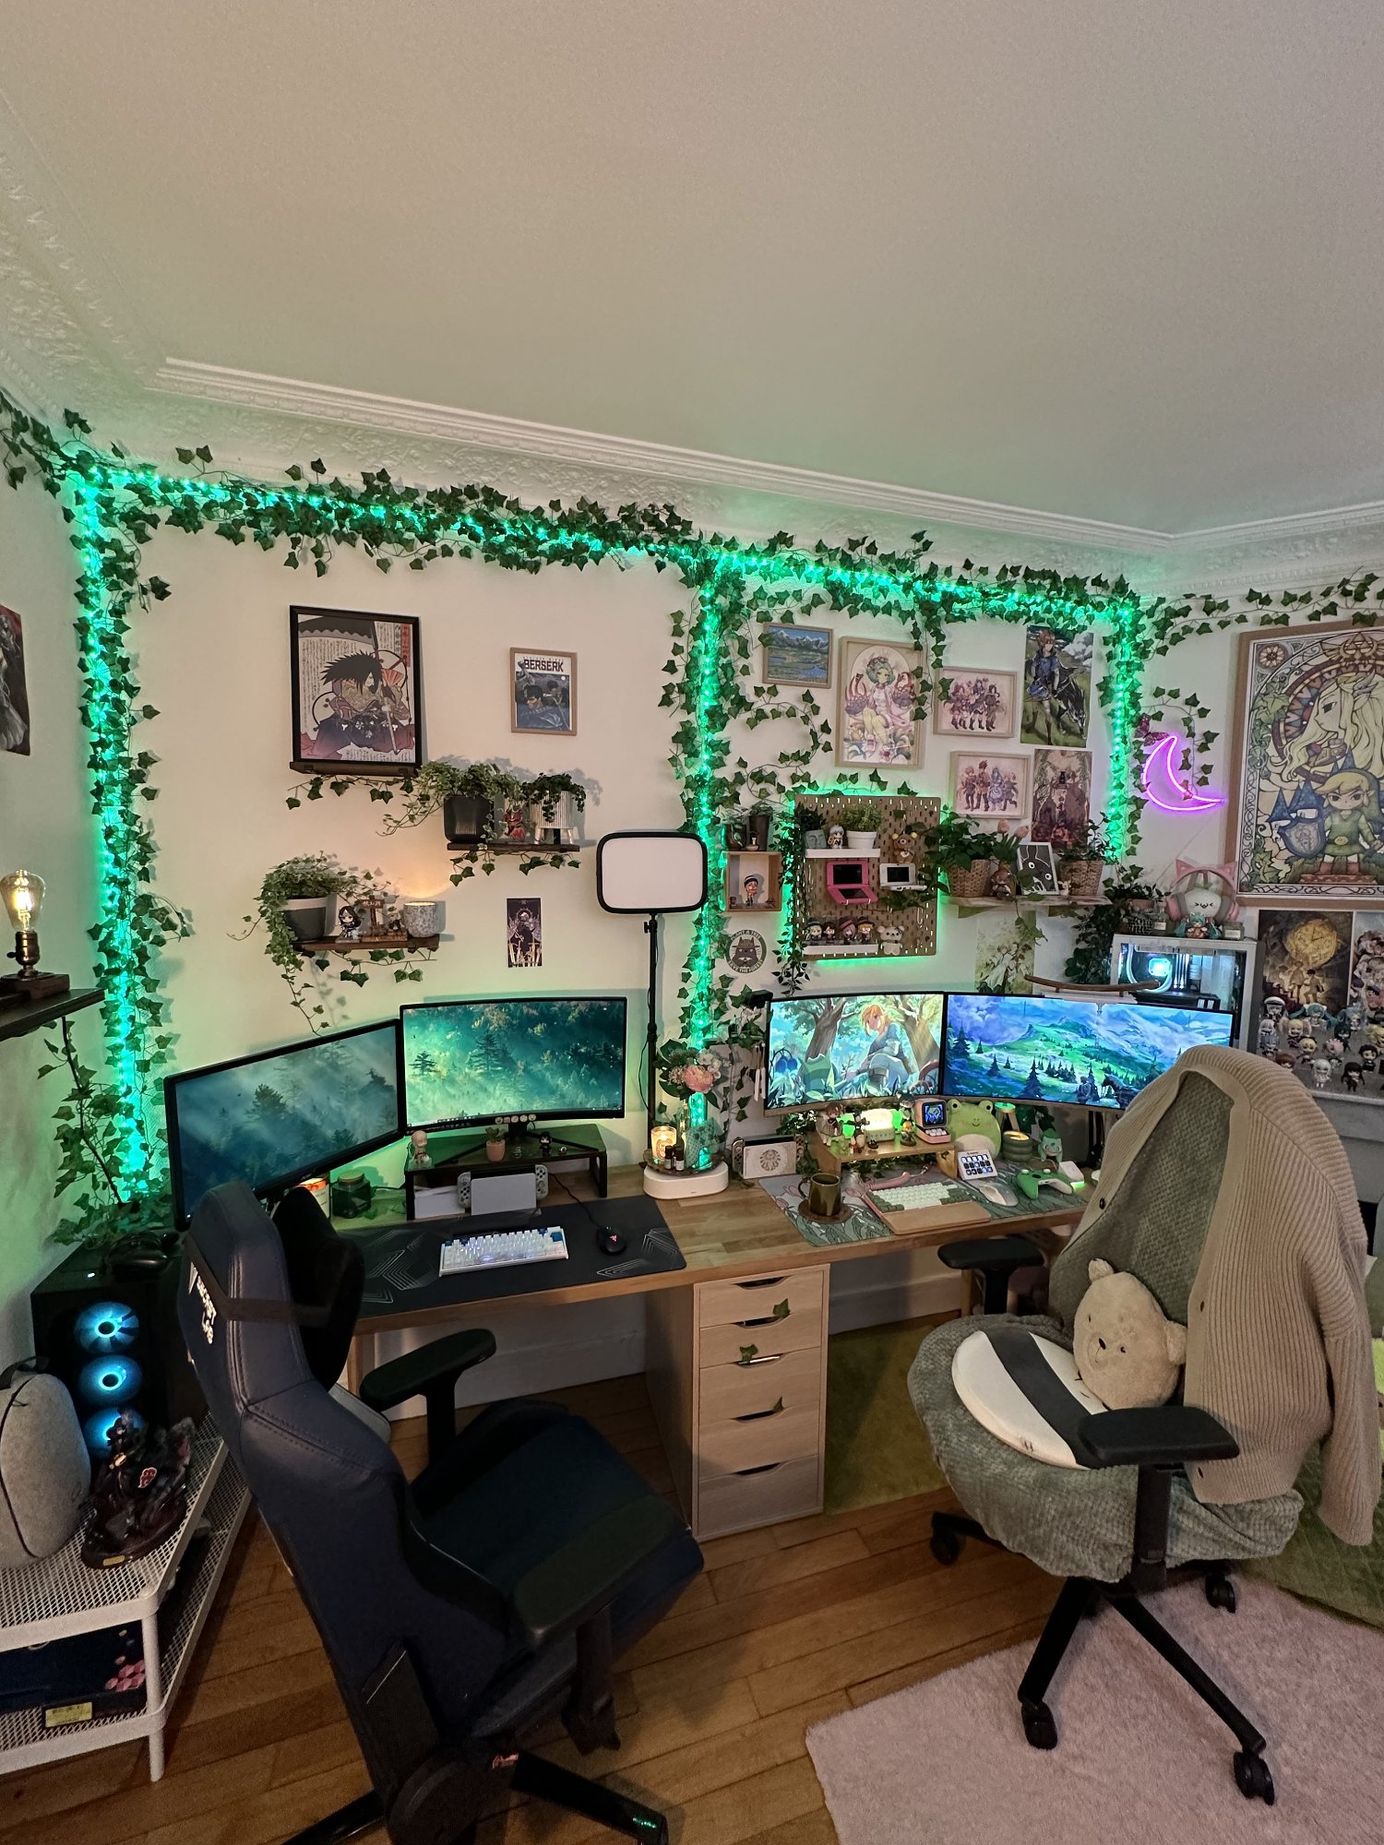 Typical Gamer Decoration